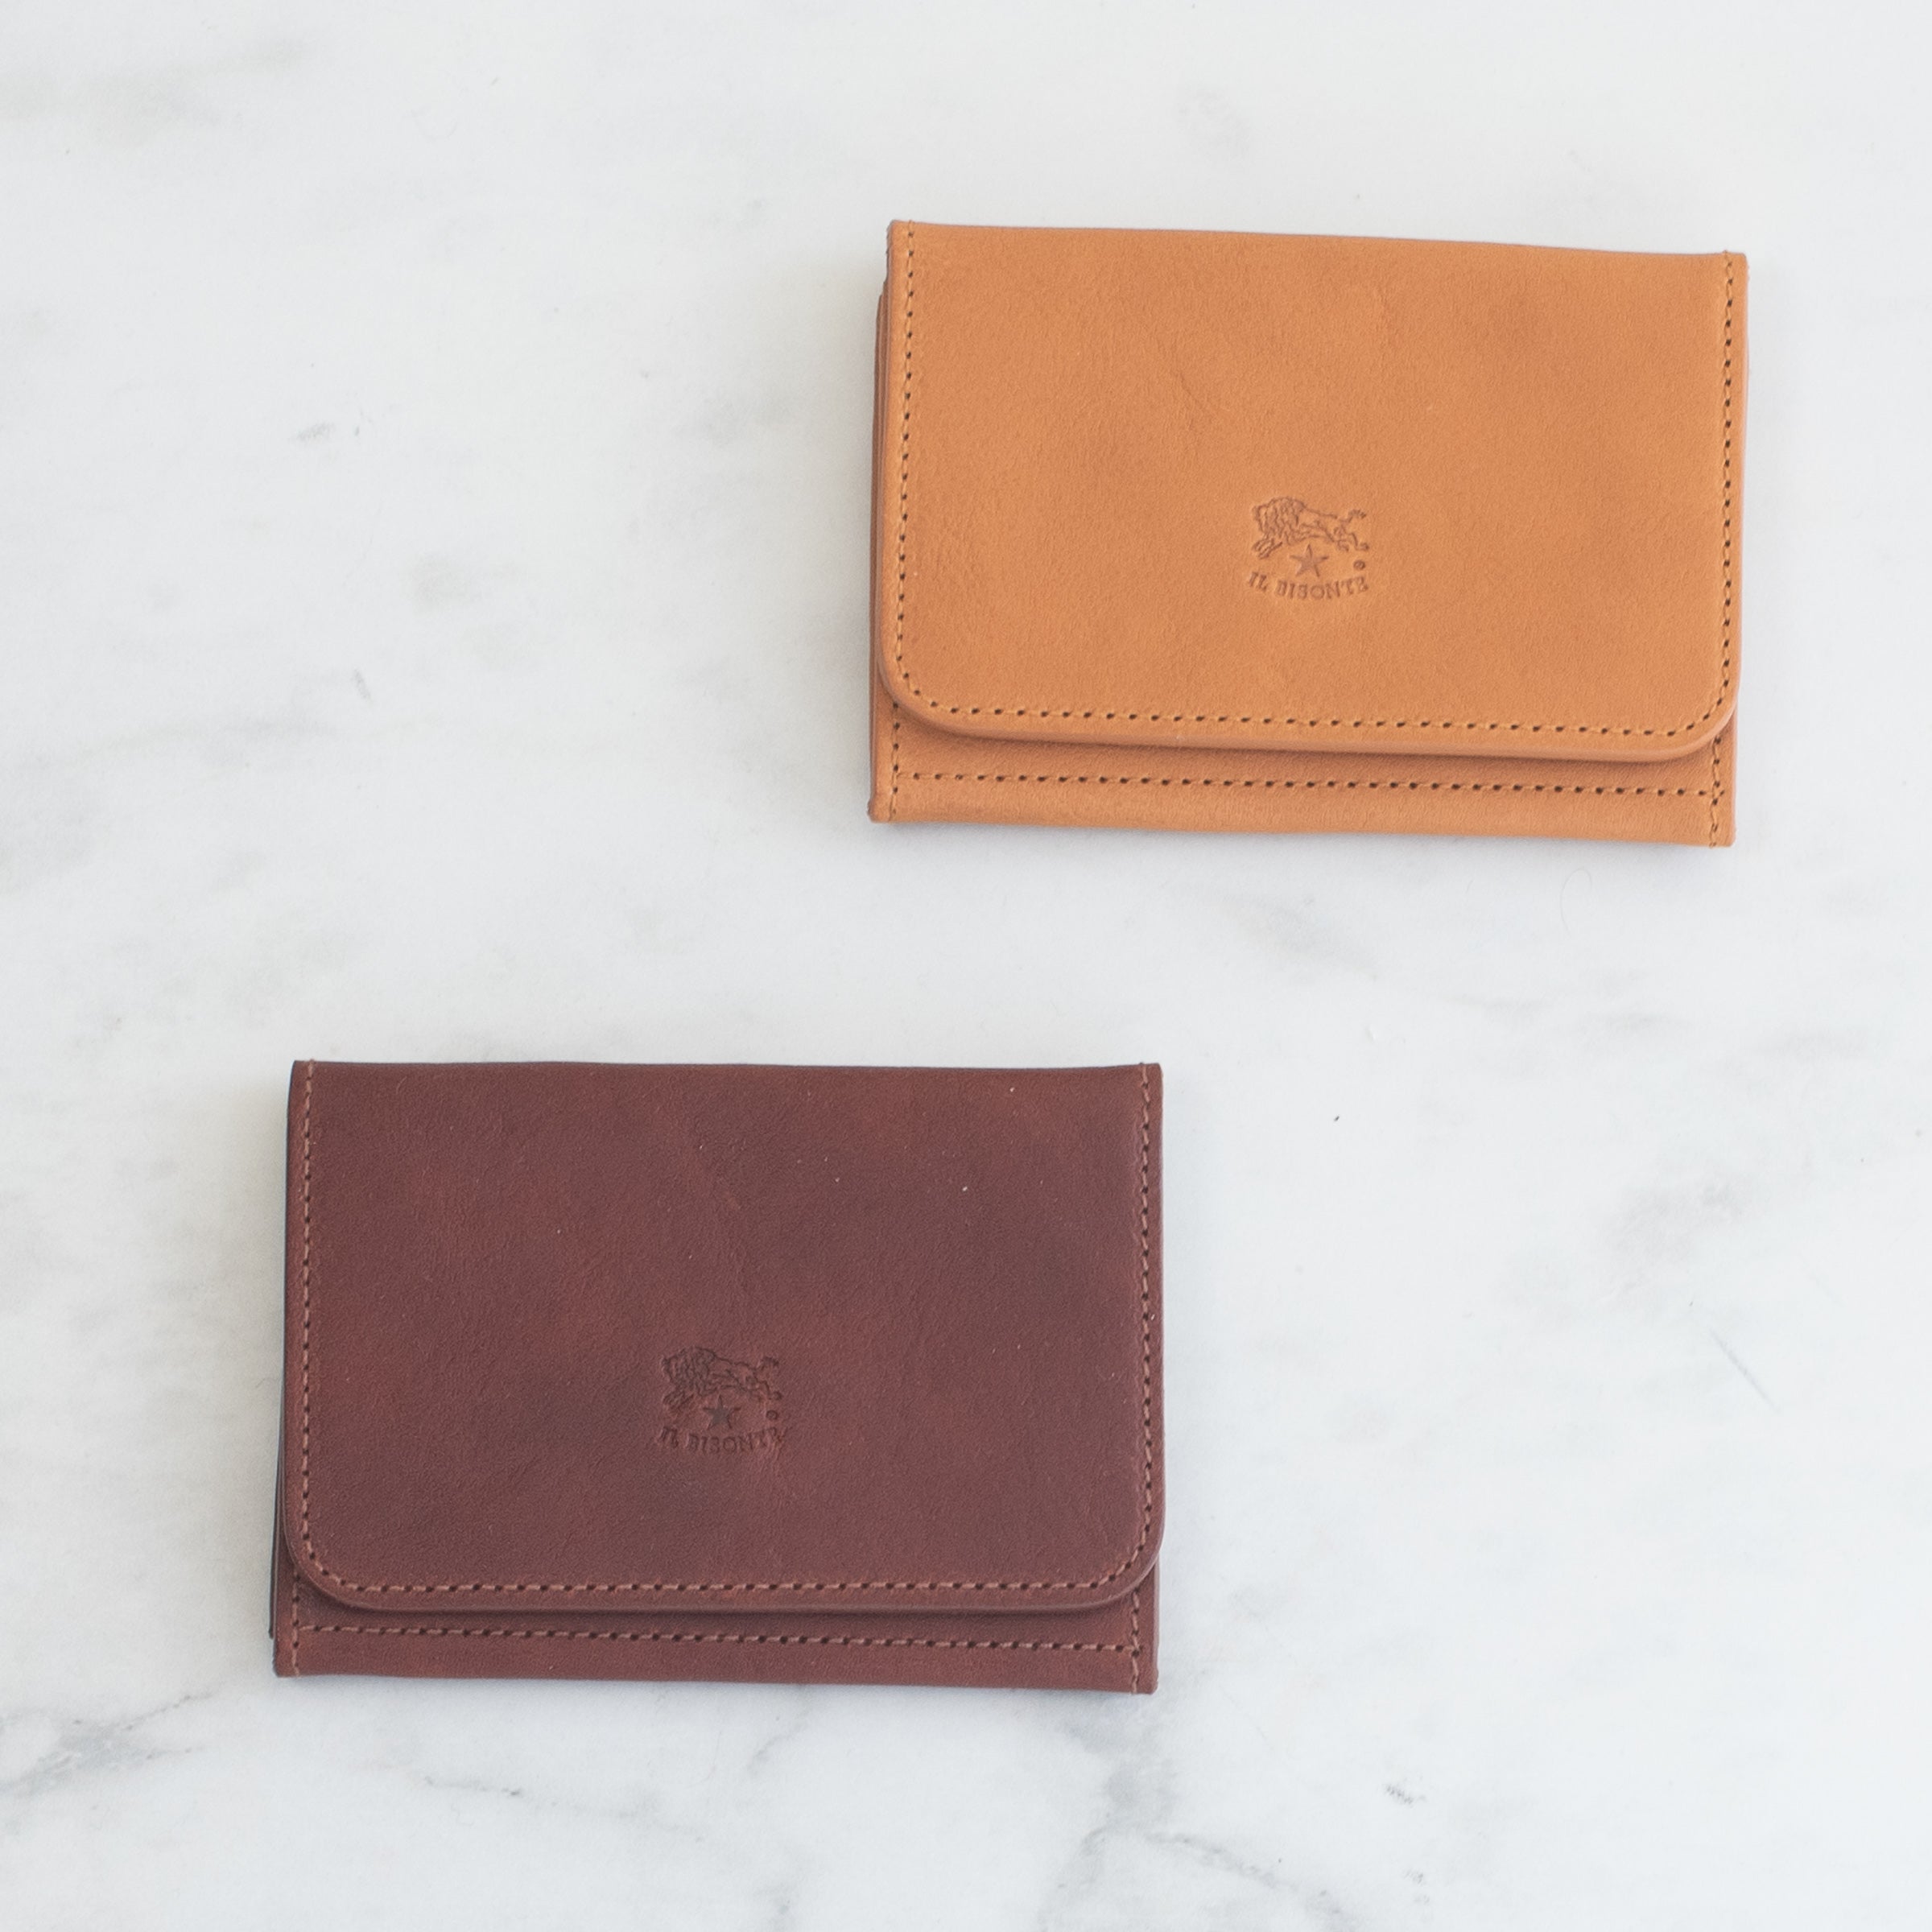 Il Bisonte Italian Leather Wallets | A Mano Online – A Mano